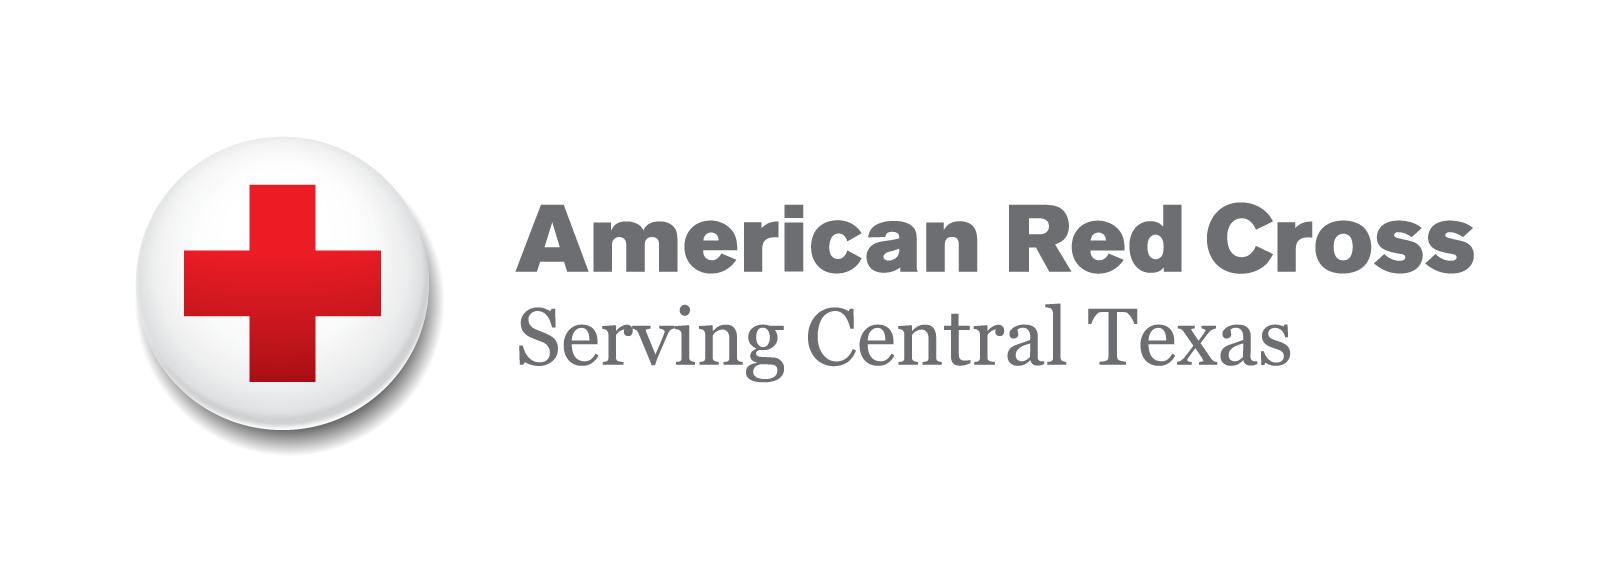 American Red Cross Serving Central Texas Logo